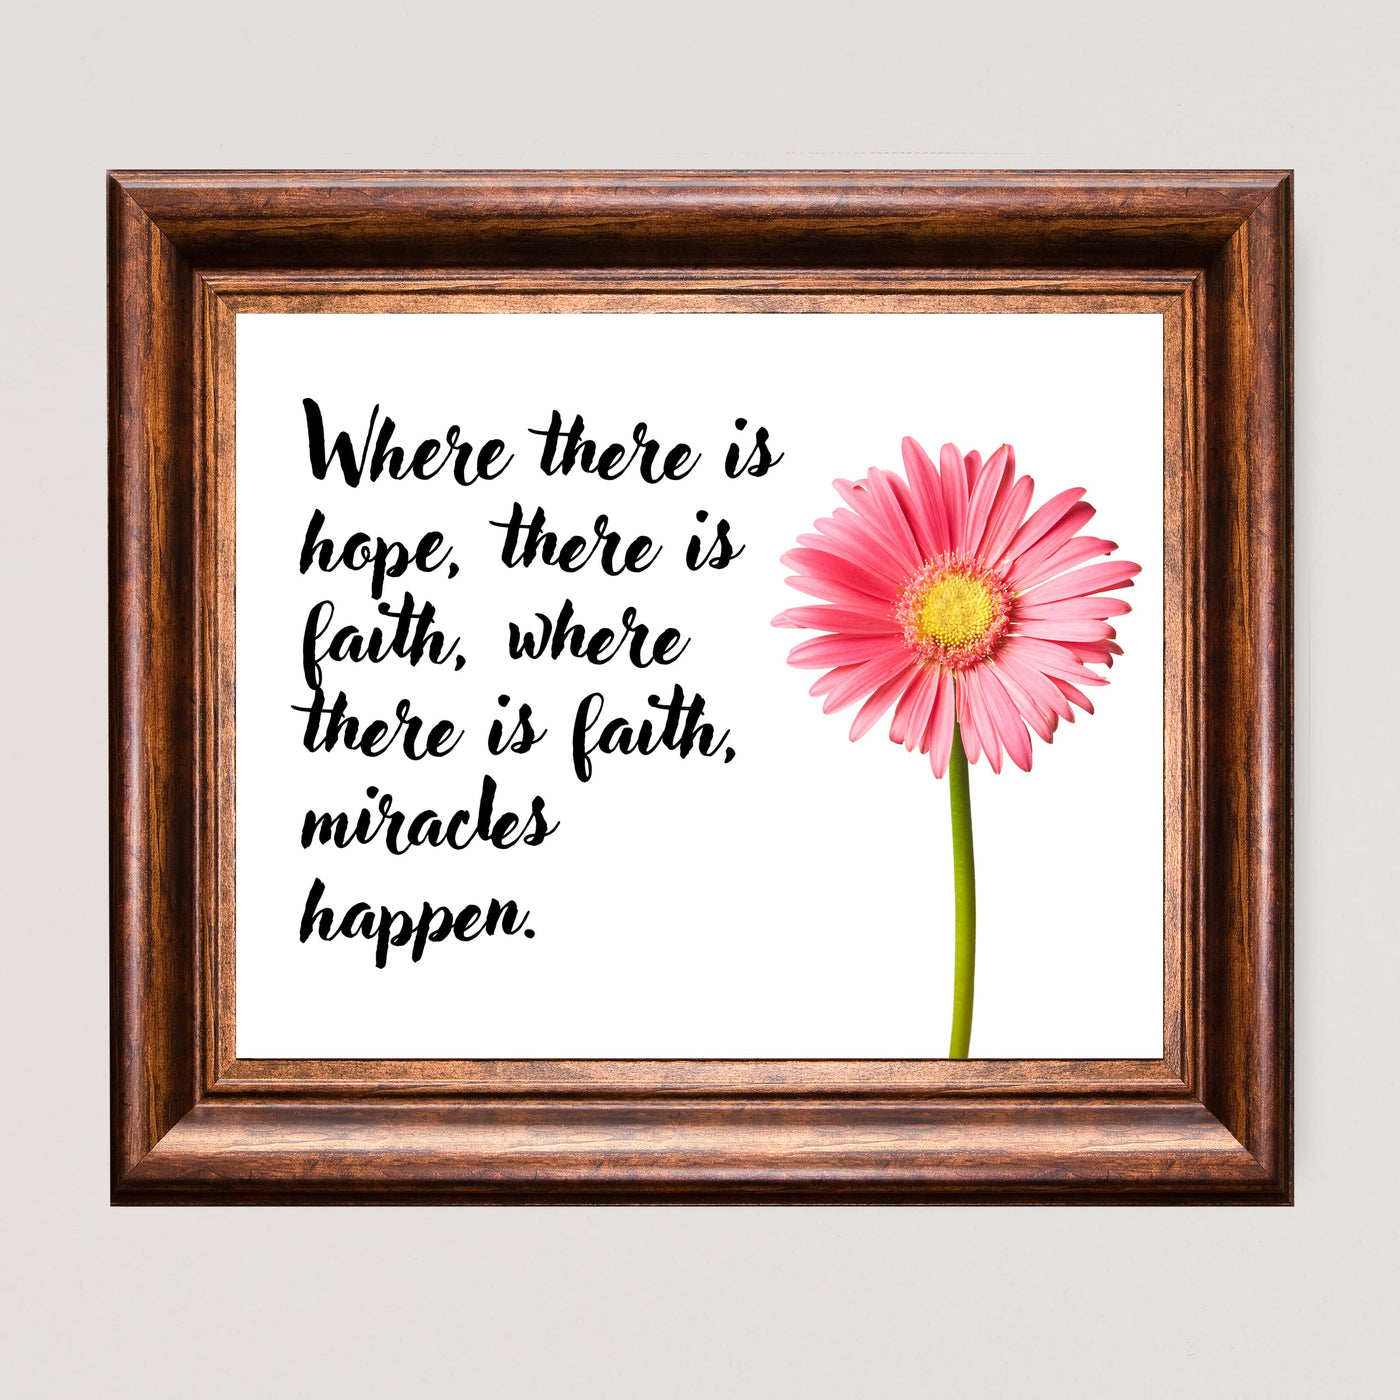 Where There Is Faith, Miracles Happen Inspirational Christian Wall Art Decor-10 x 8" Floral Picture Print -Ready to Frame. Motivational Decor for Home-Office-Church. Great Religious Gift of Faith!